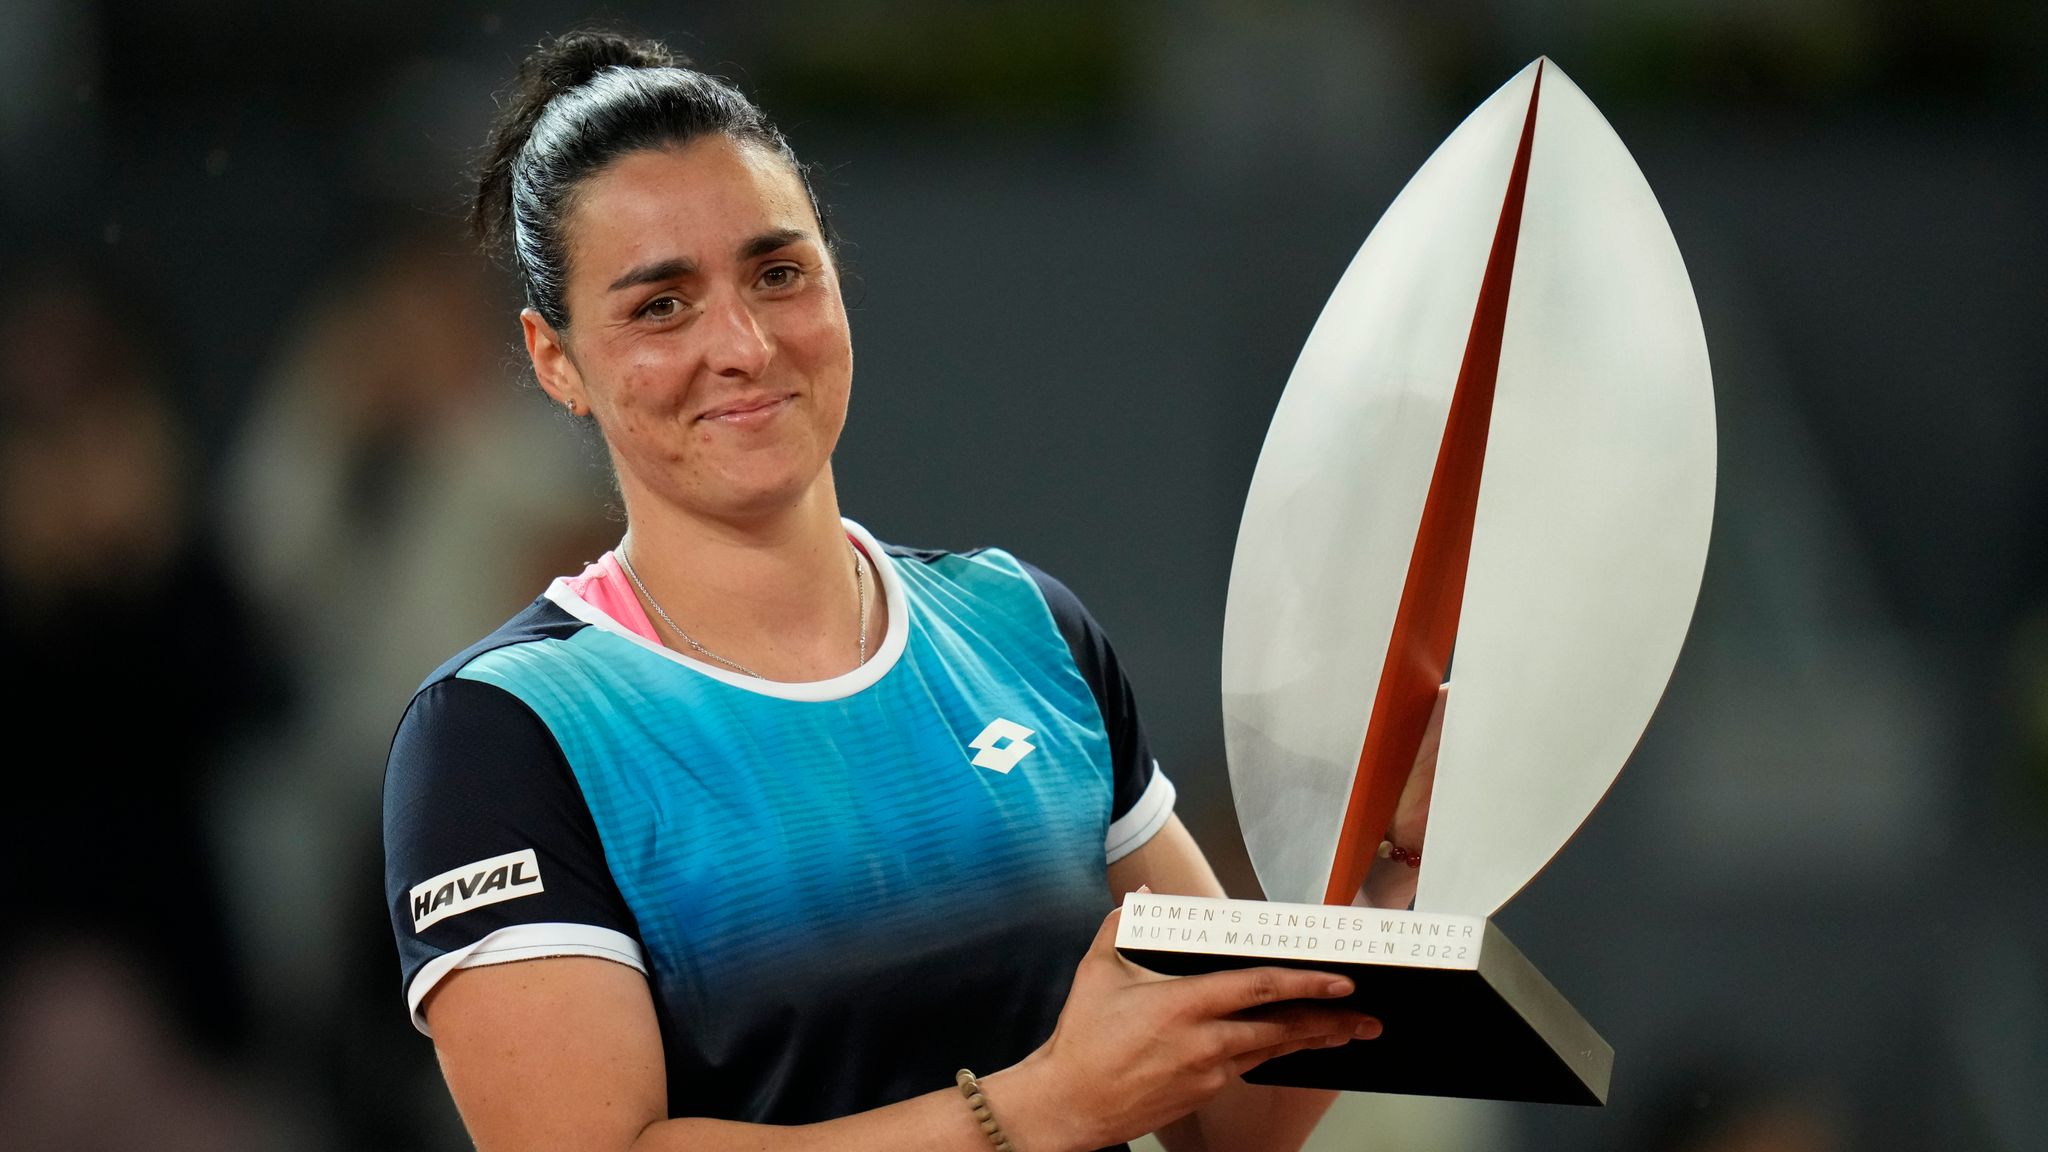 Tunisian star Ons Jabeur creates history by clinching Madrid Open title |  Tennis News | Sky Sports